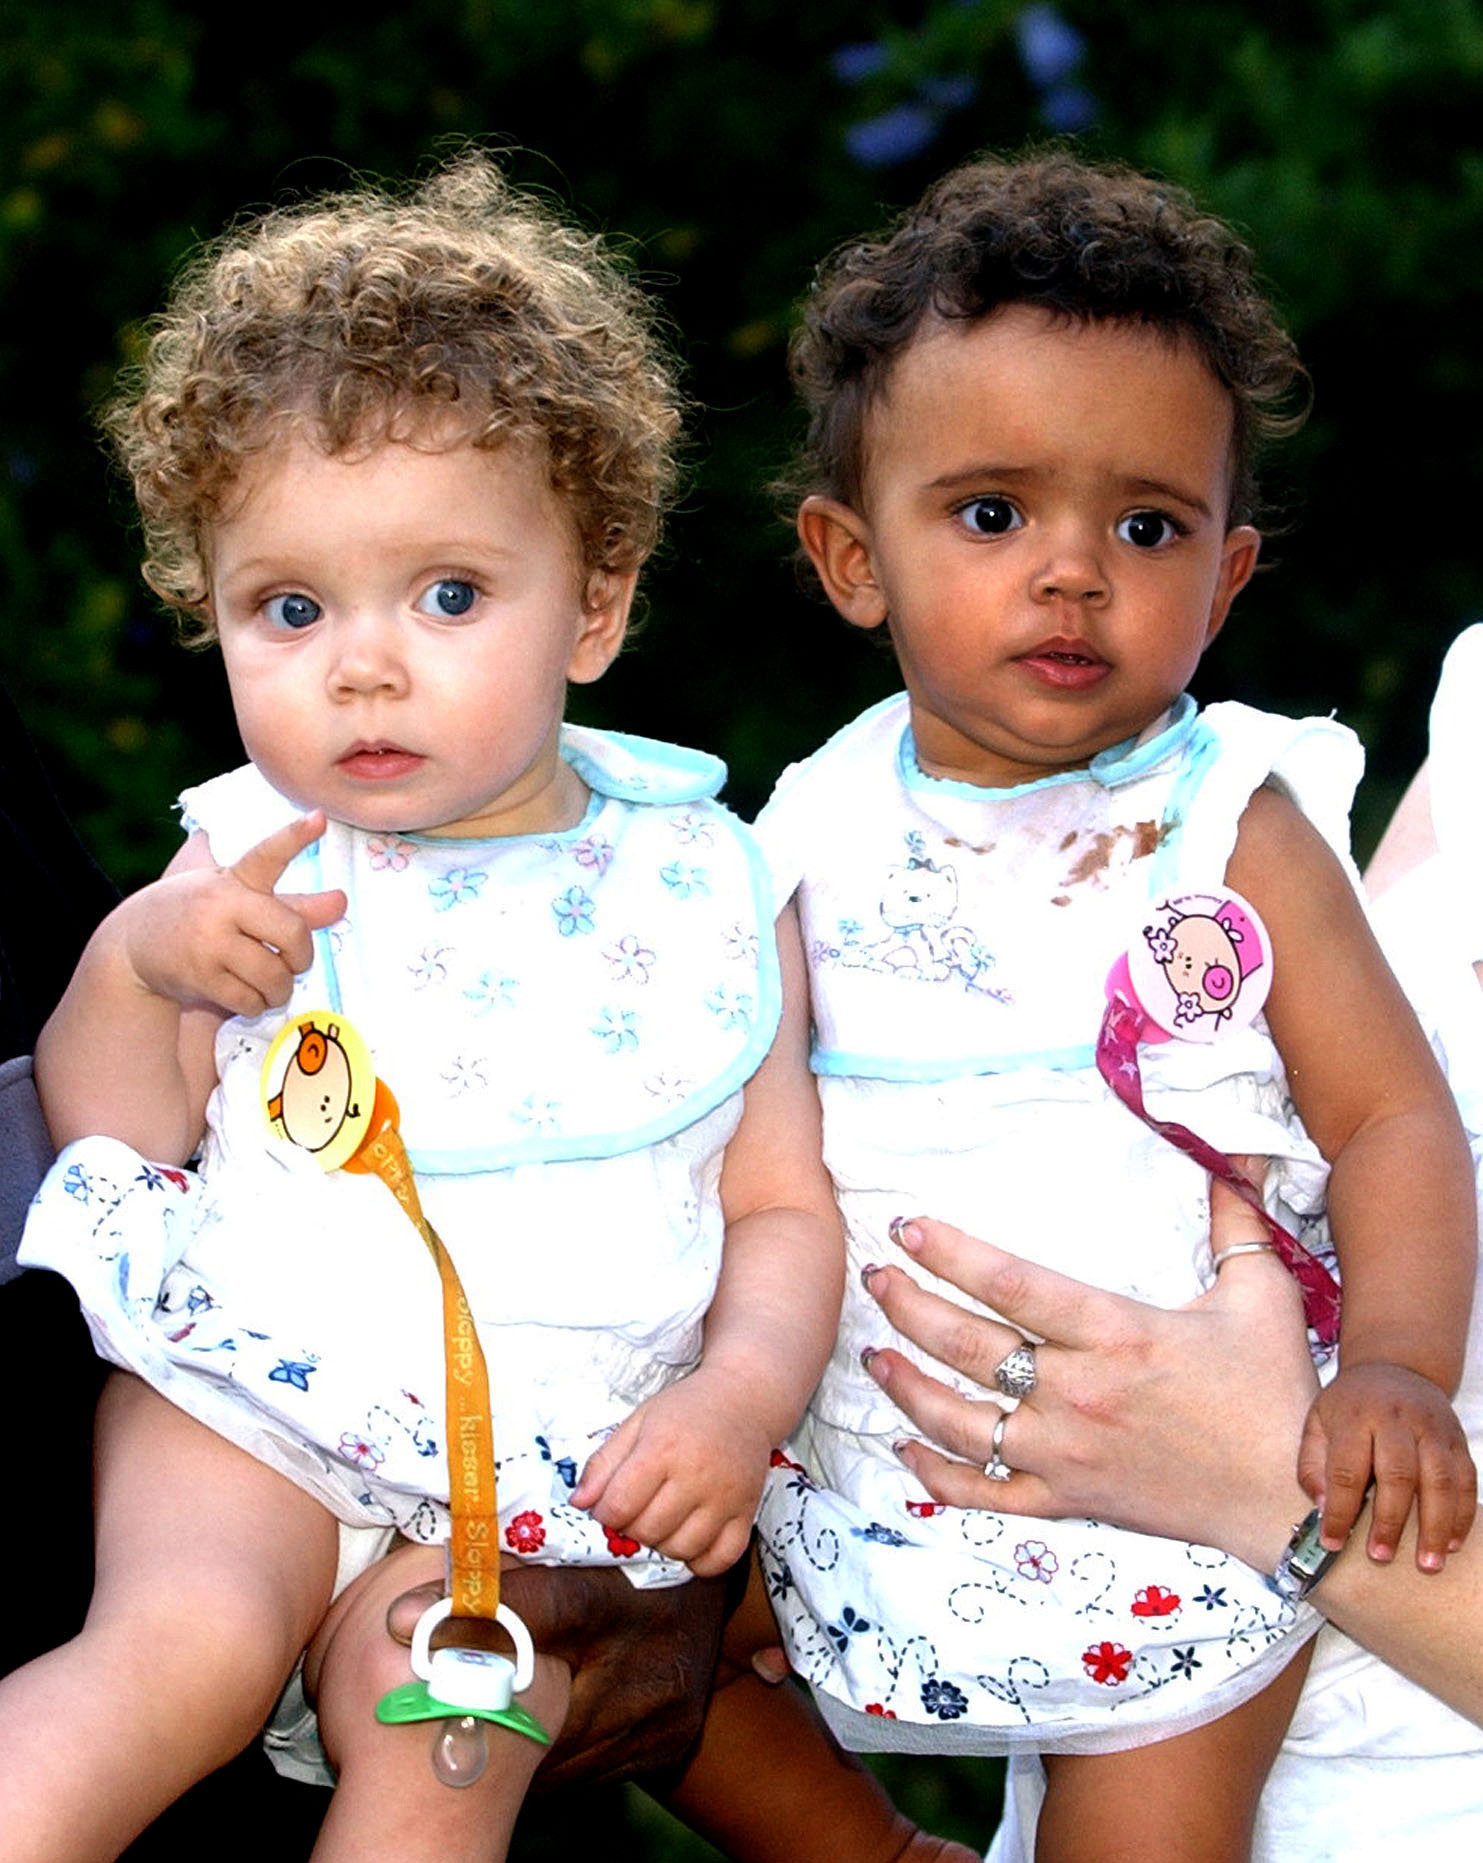 Meet the black and white twins that baffle everyone